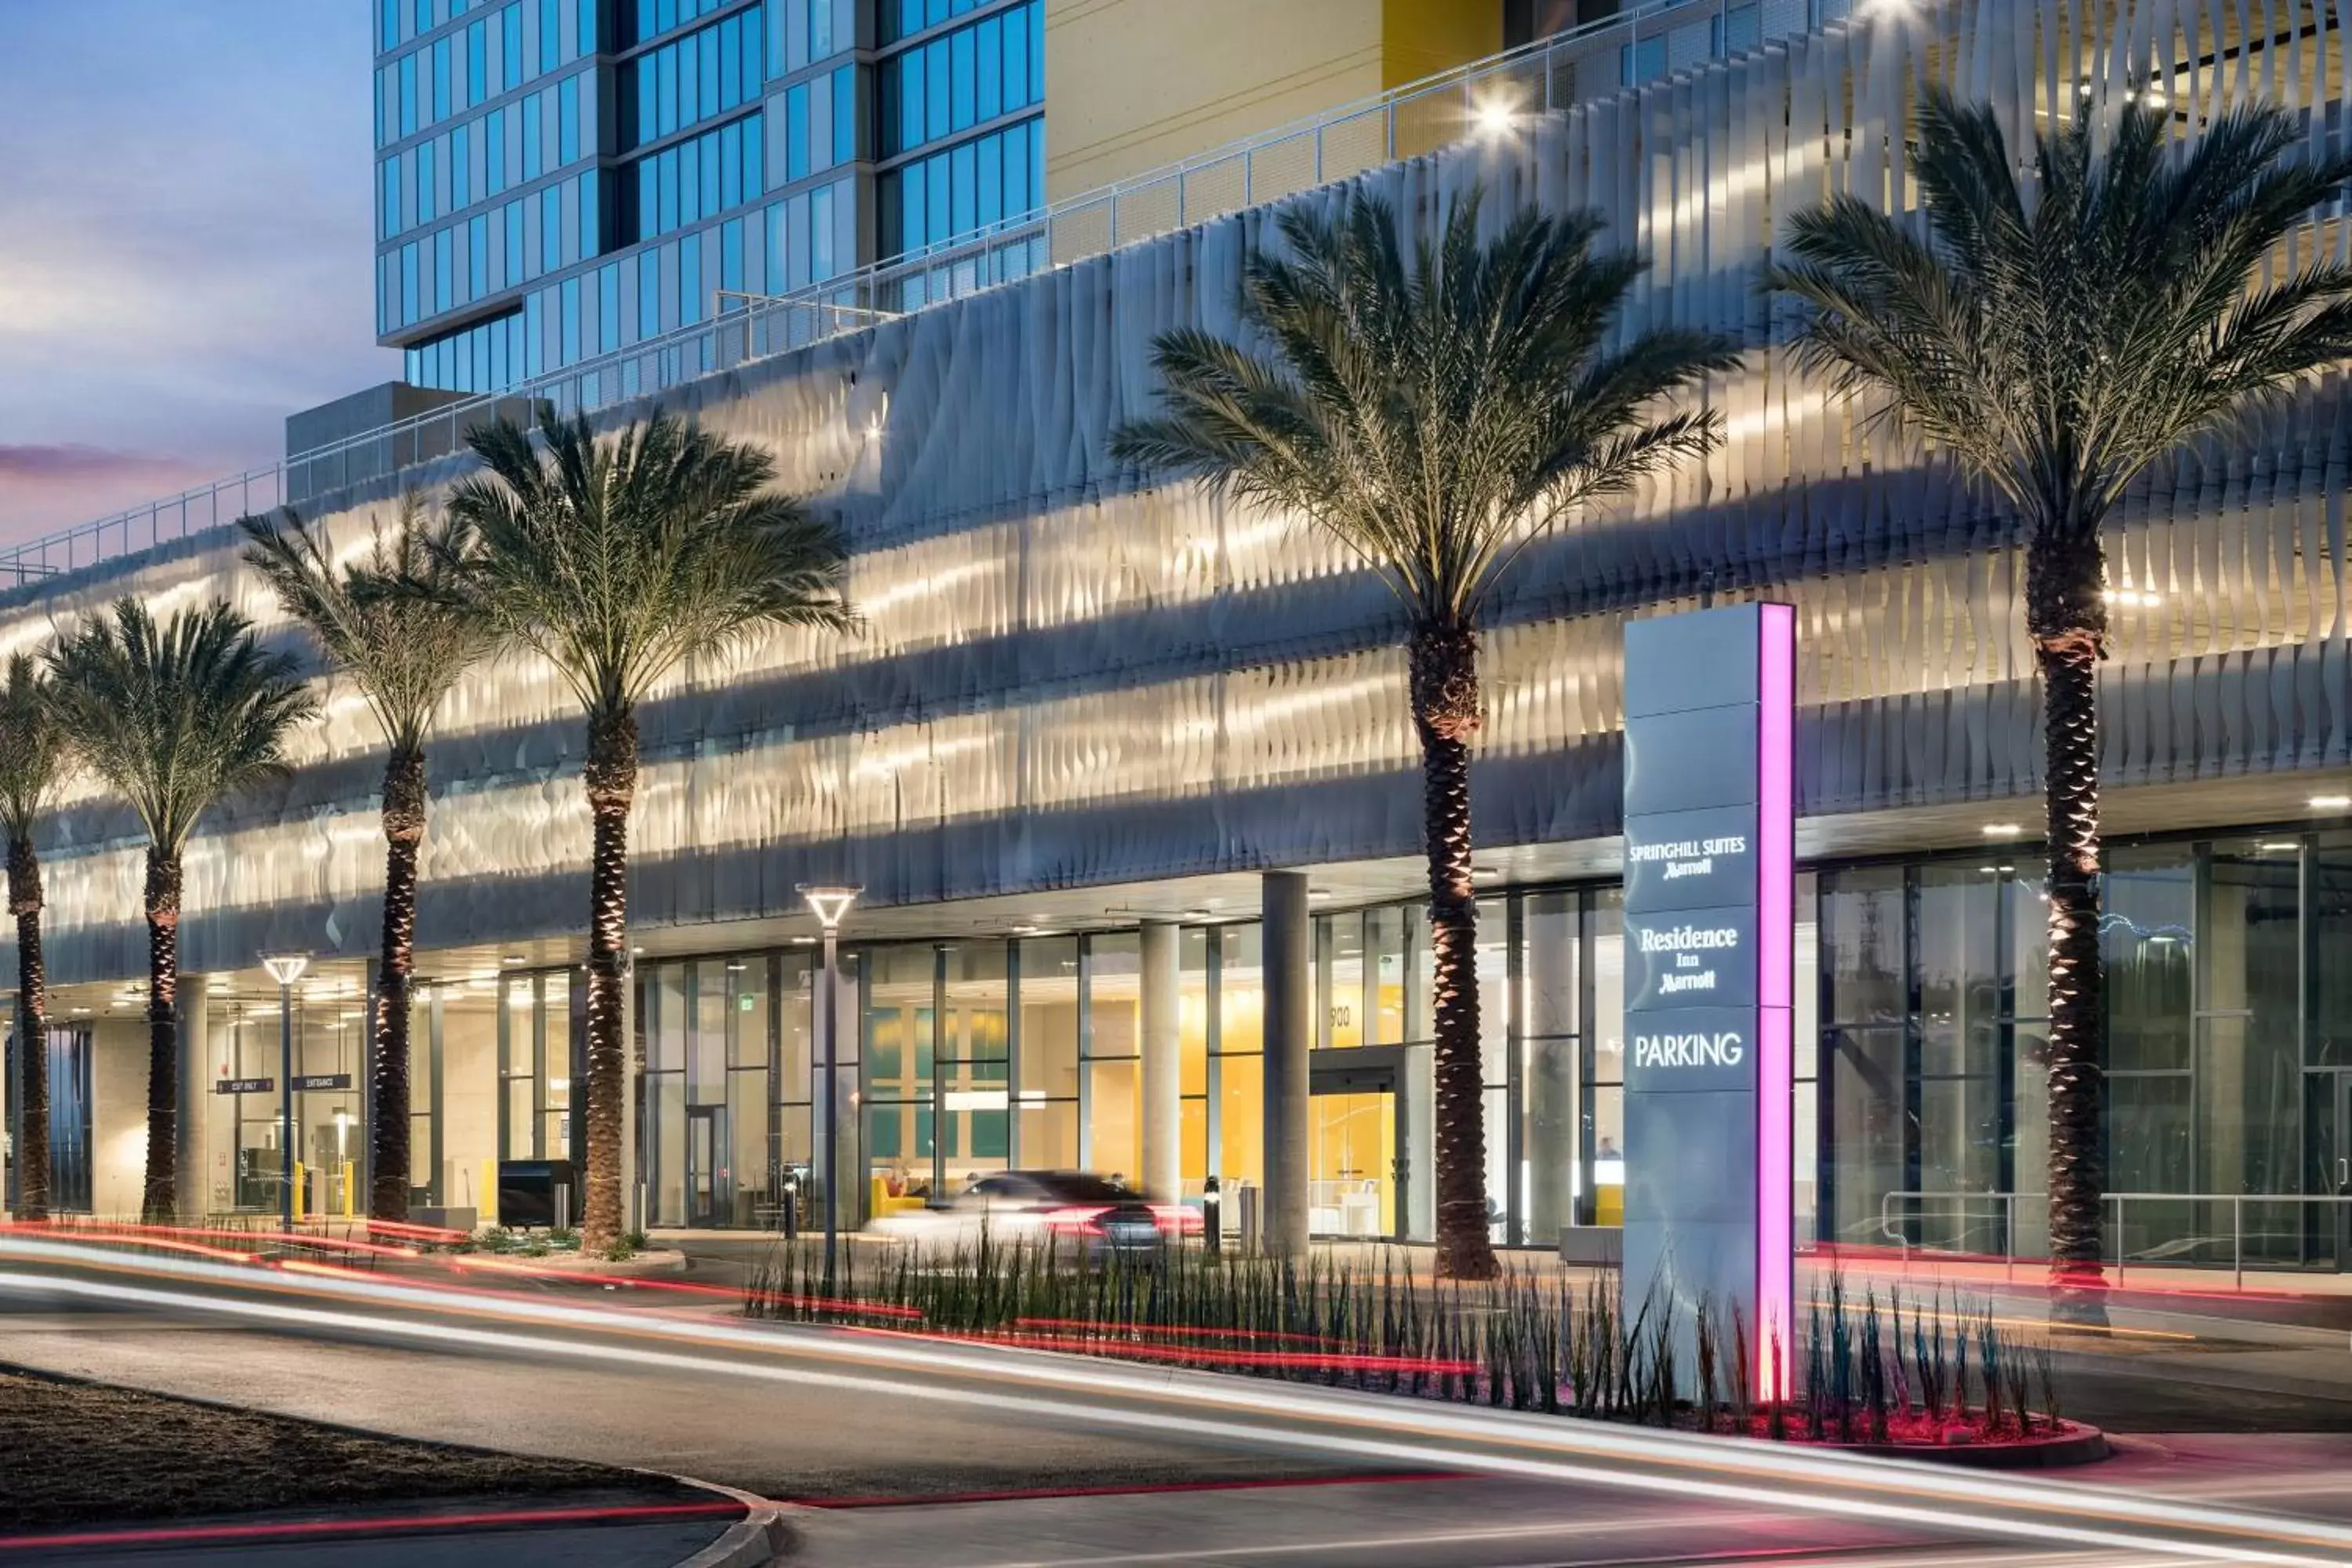 Property Building in Residence Inn by Marriott San Diego Downtown/Bayfront